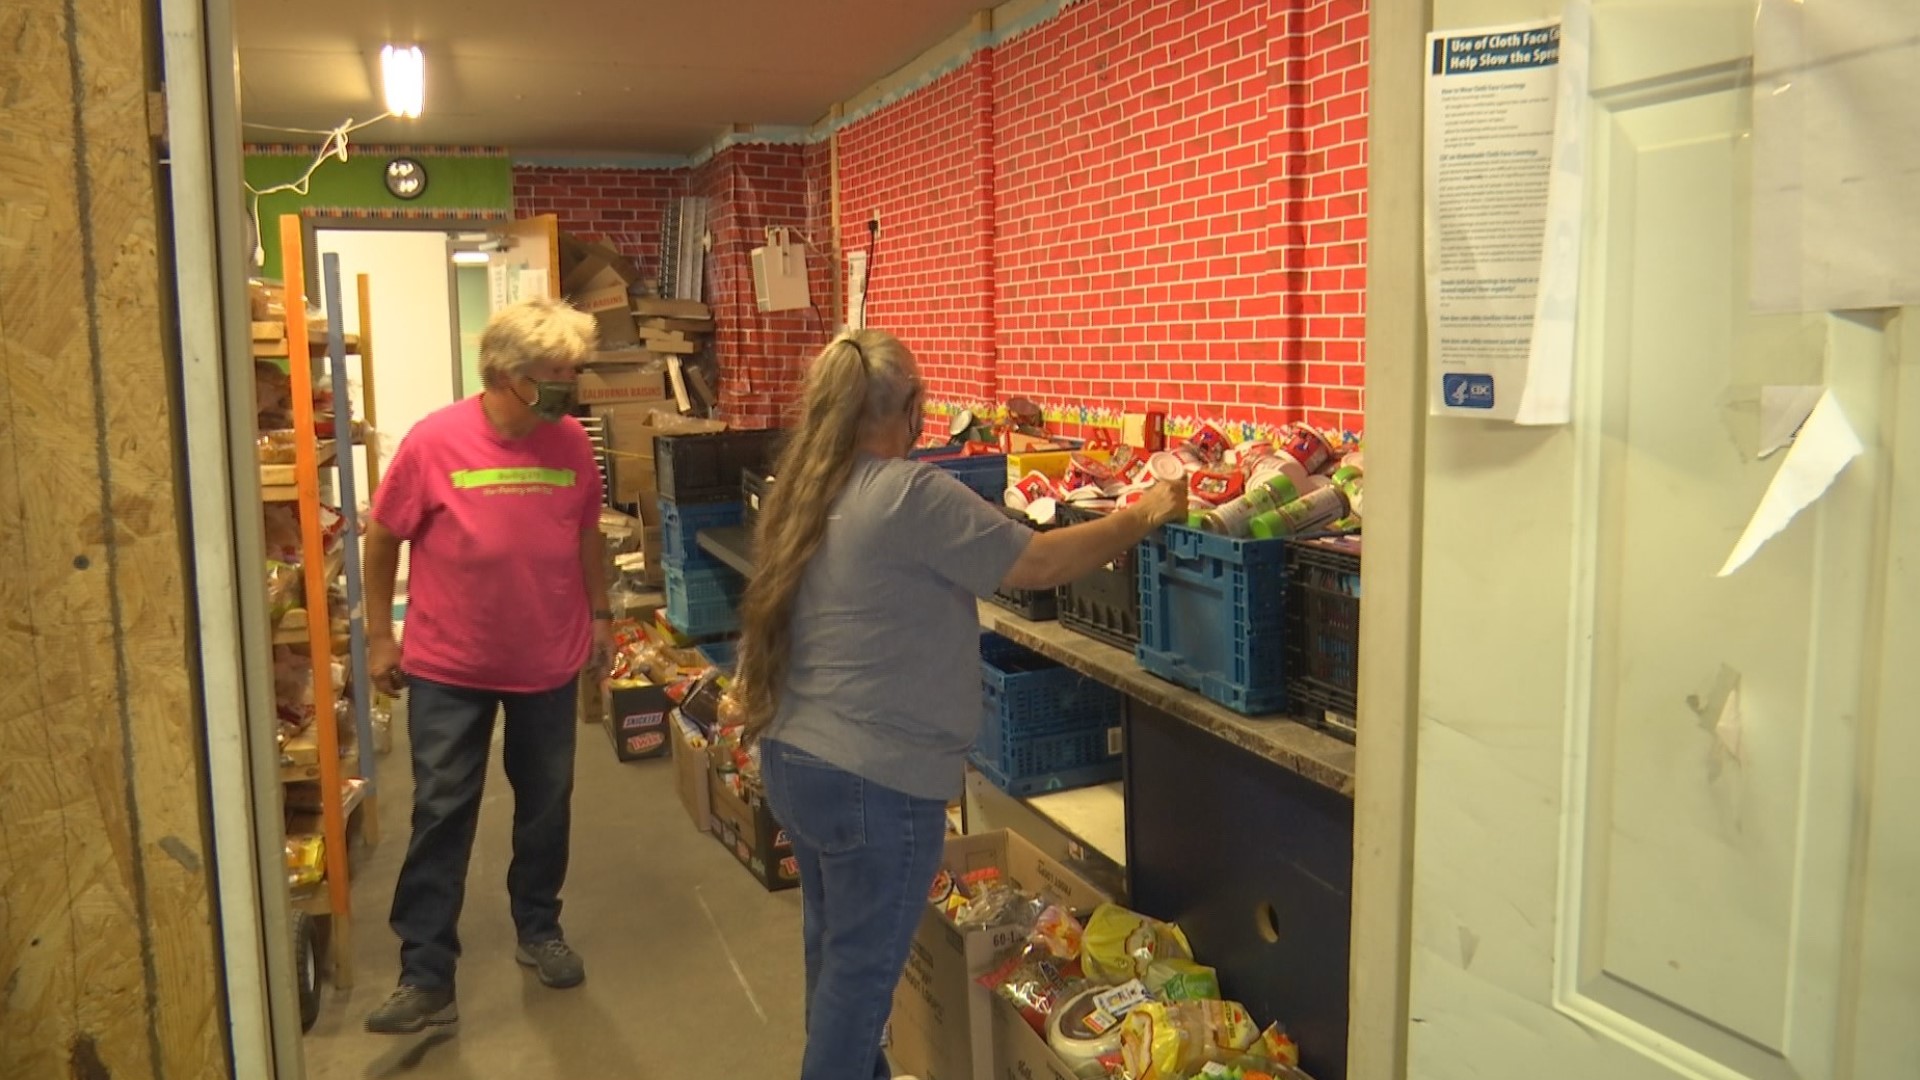 As the number of food-insecure families rise, food pantry donations are going down. That's why Pantry 279 is asking for the public's help.